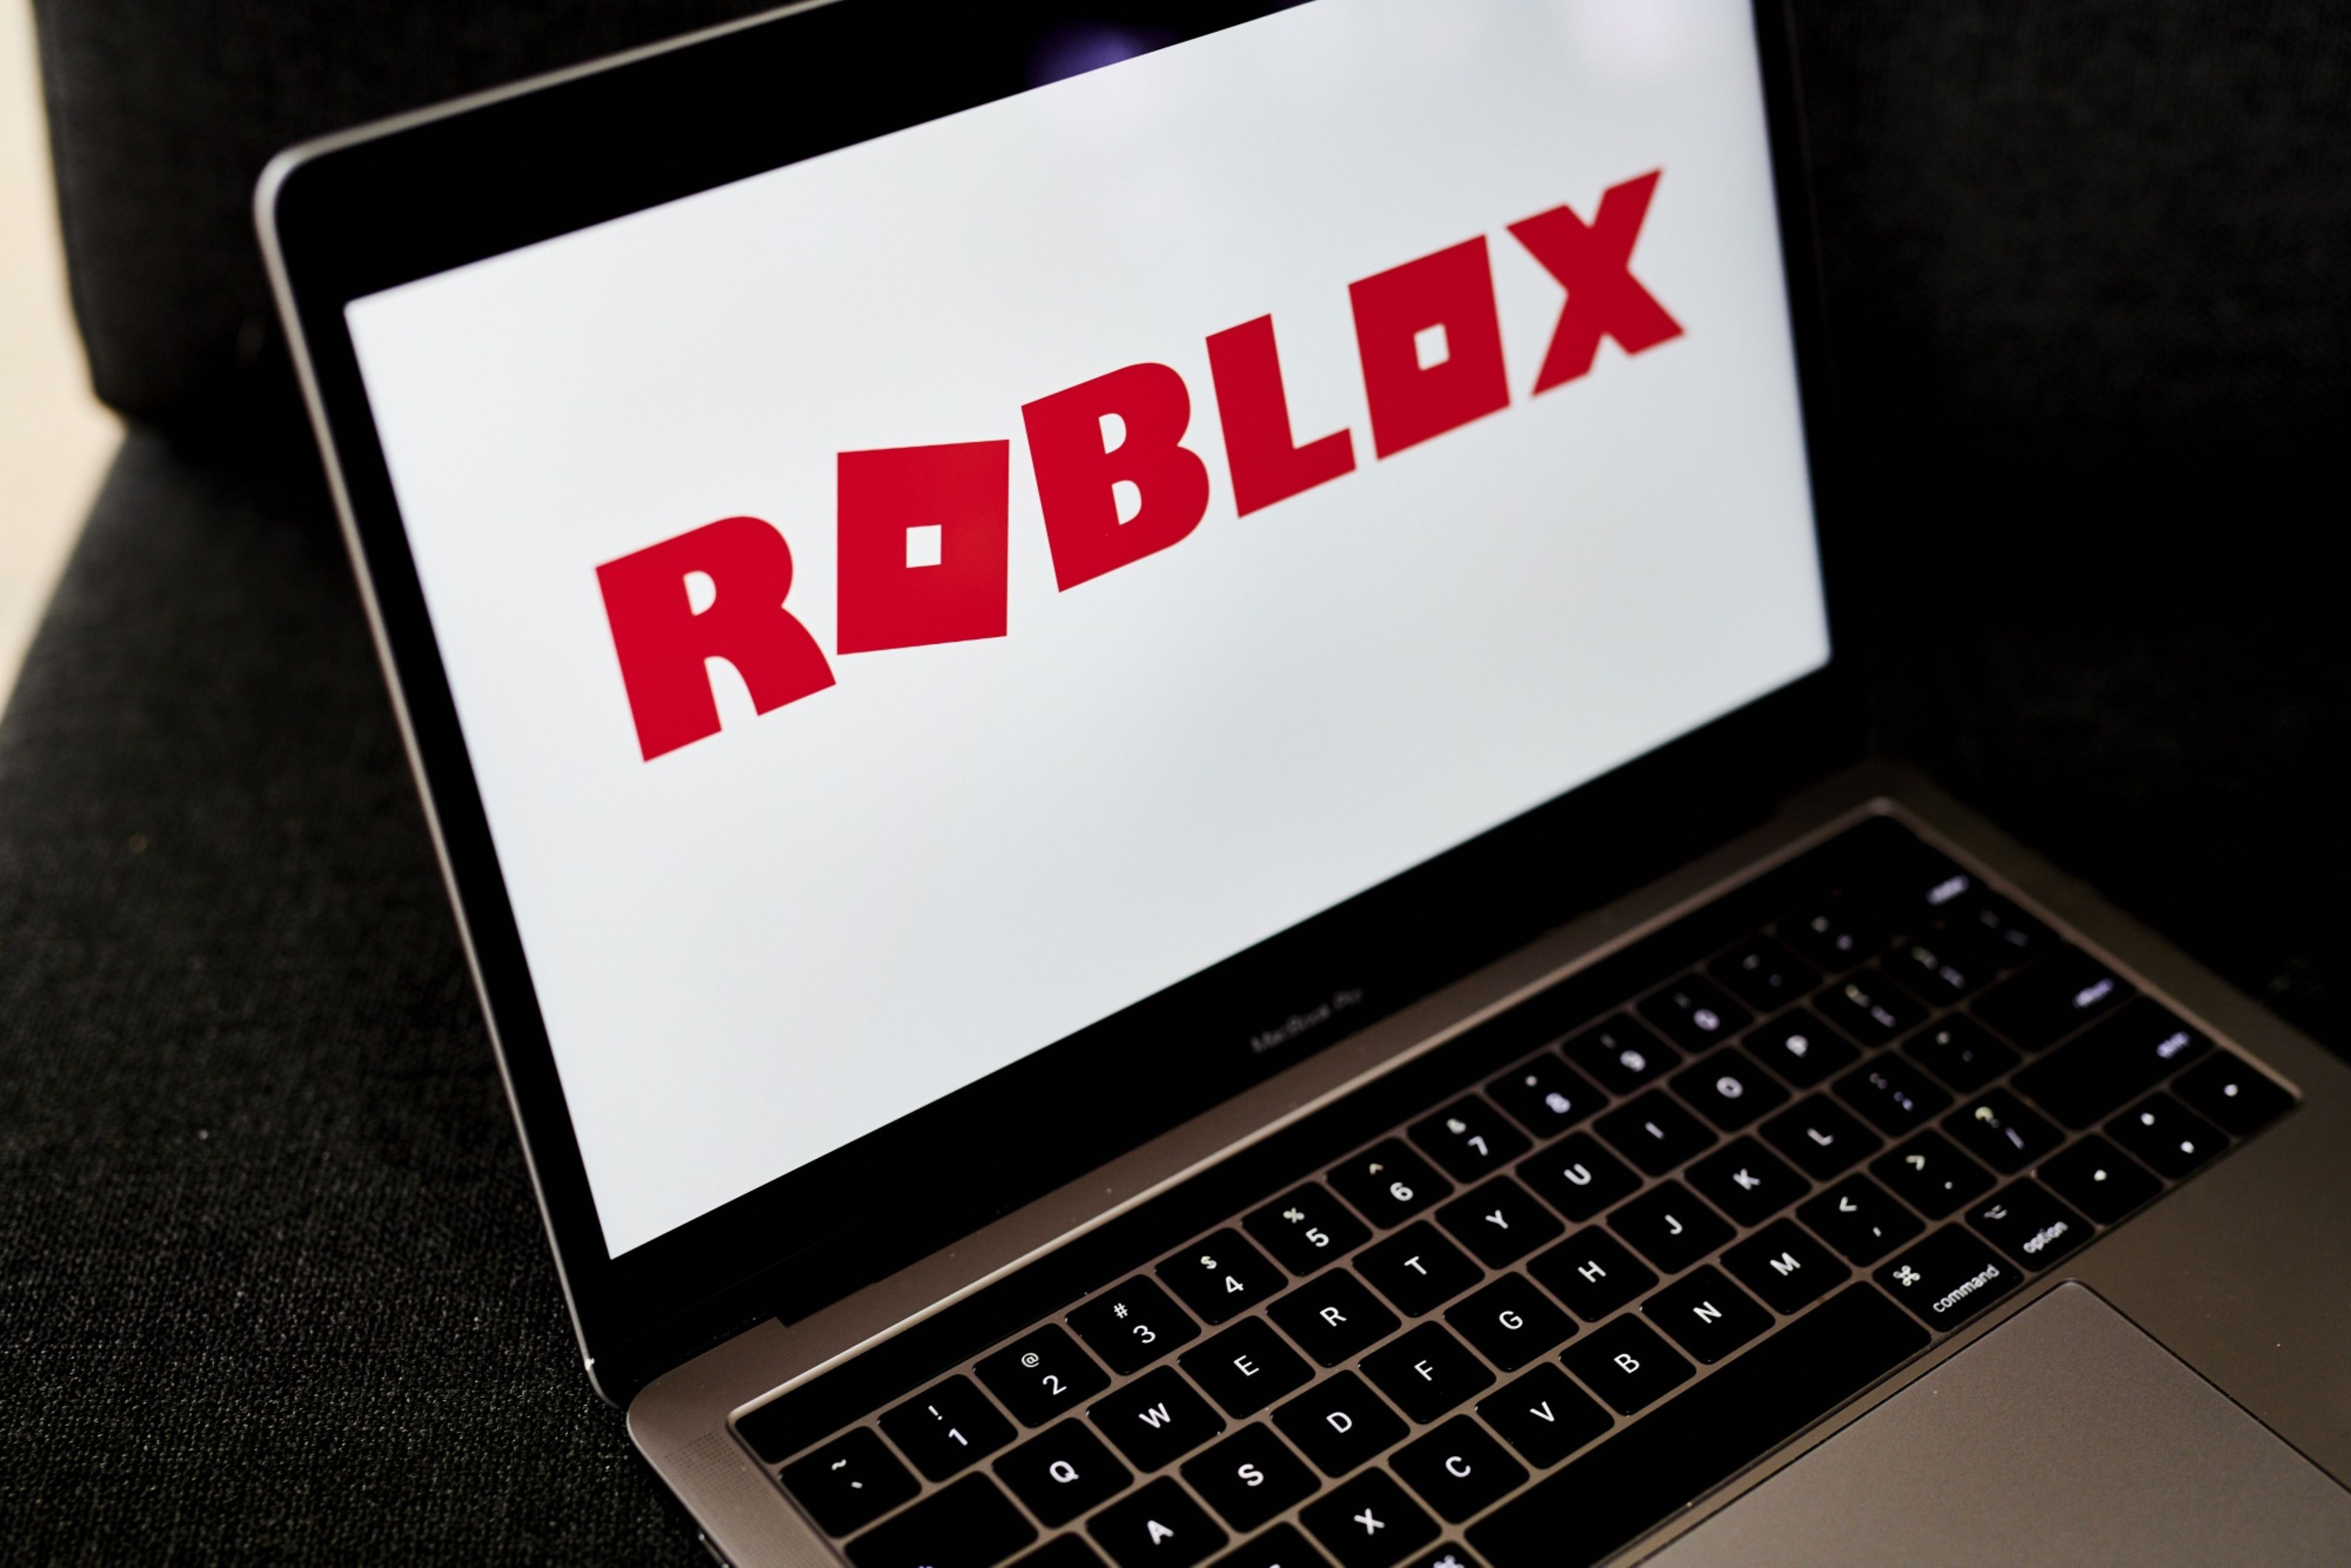 Roblox CEO says immersive advertising system will rollout before